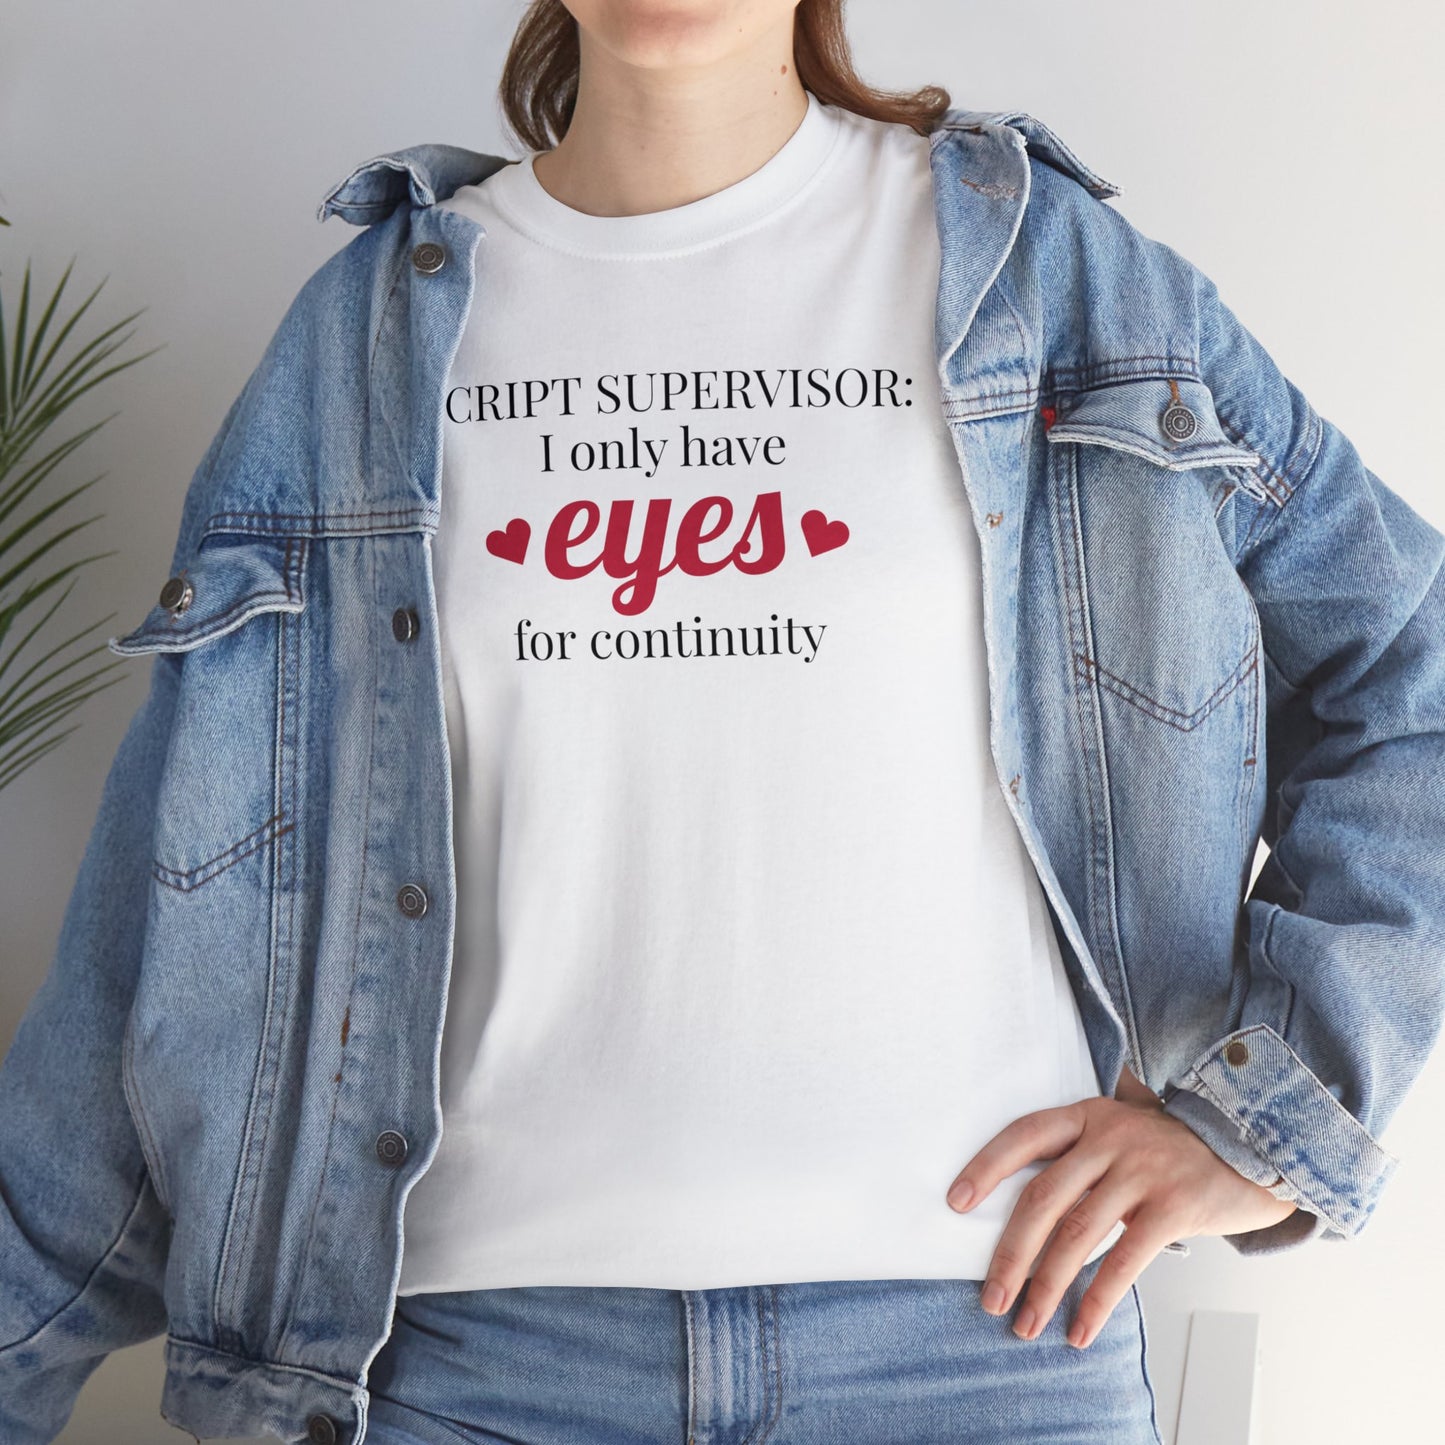 "SCRIPT SUPERVISOR: I only have eyes for continuity" t-shirt